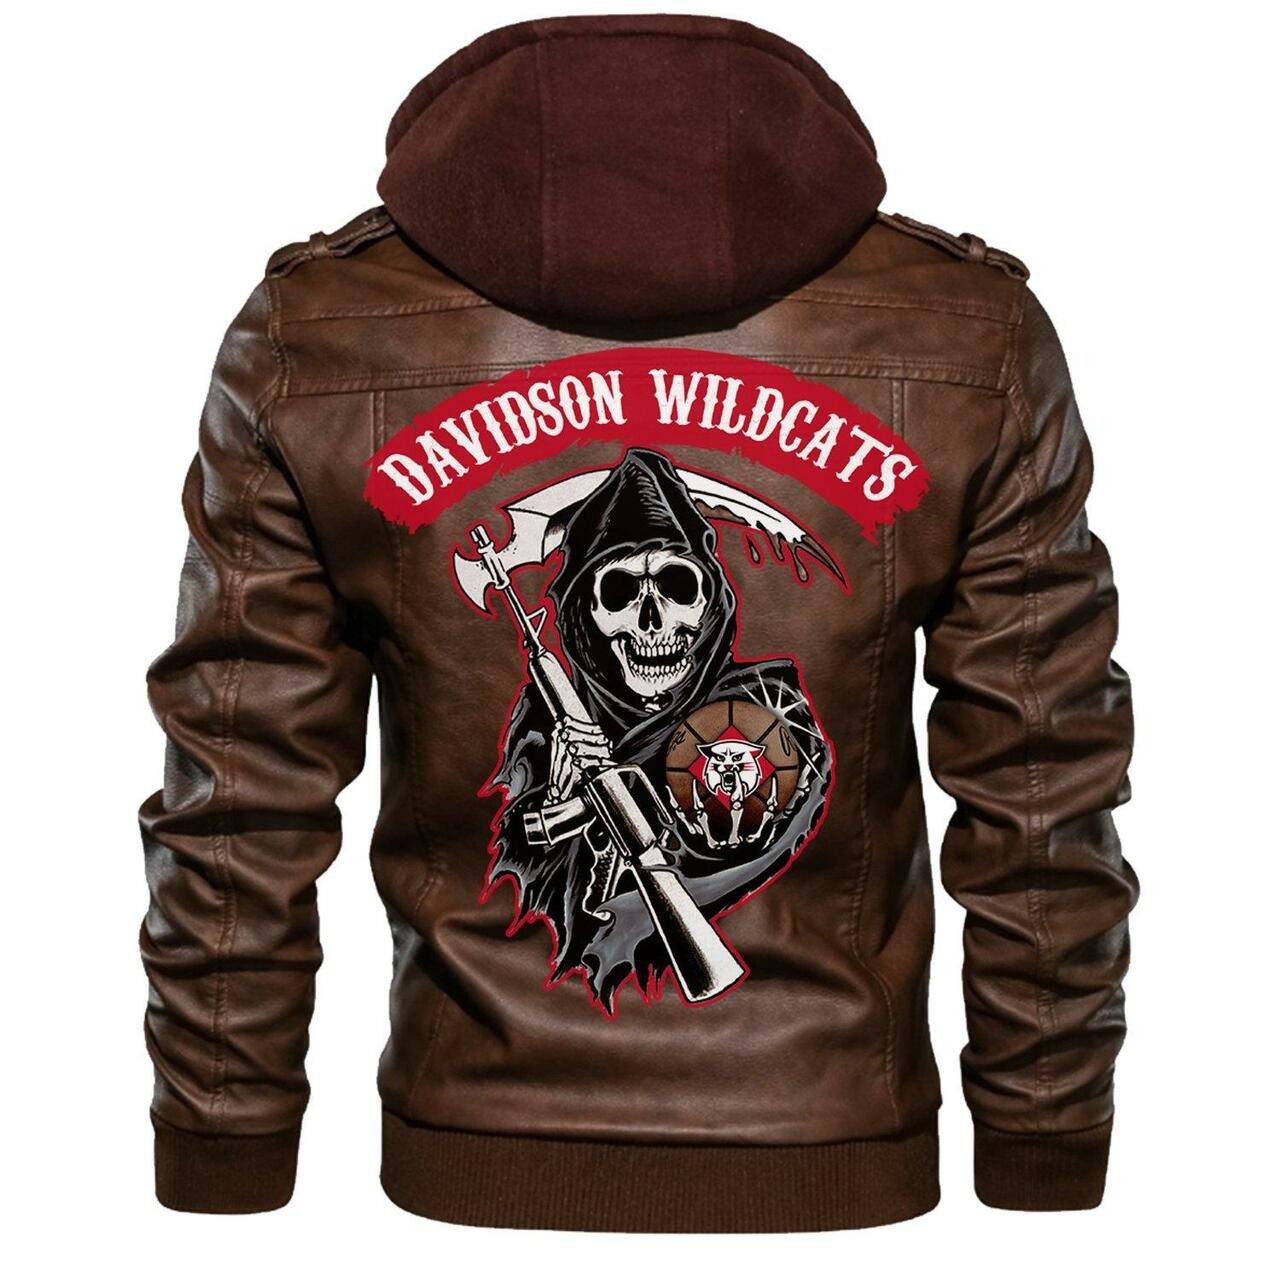 Check out and find the right leather jacket below 145